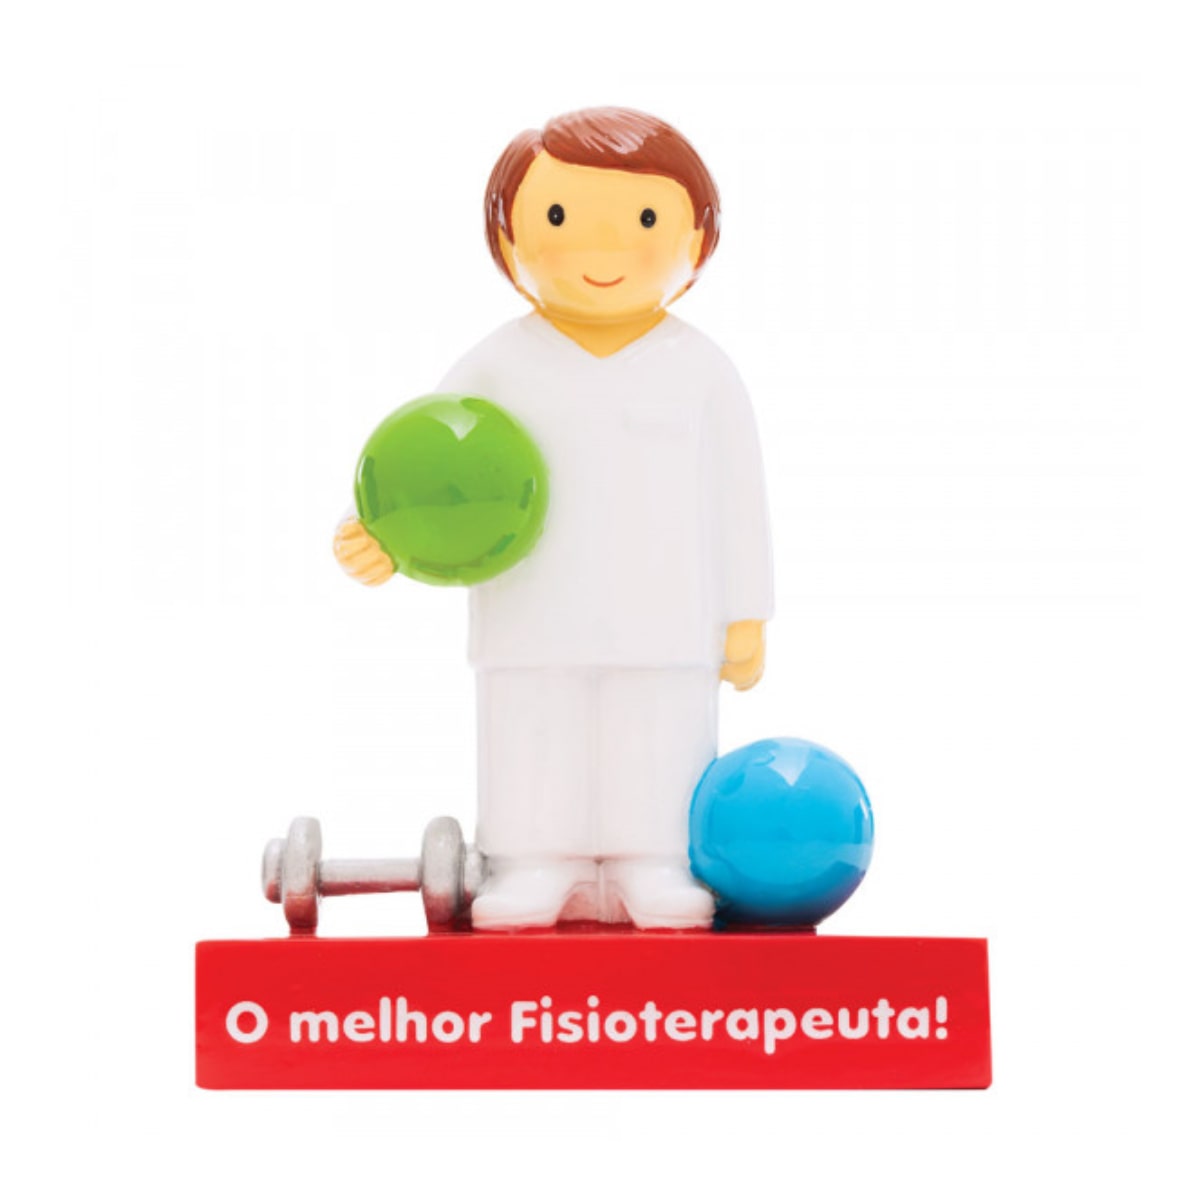 O melhor Fisioterapeuta! Little Drops of Water